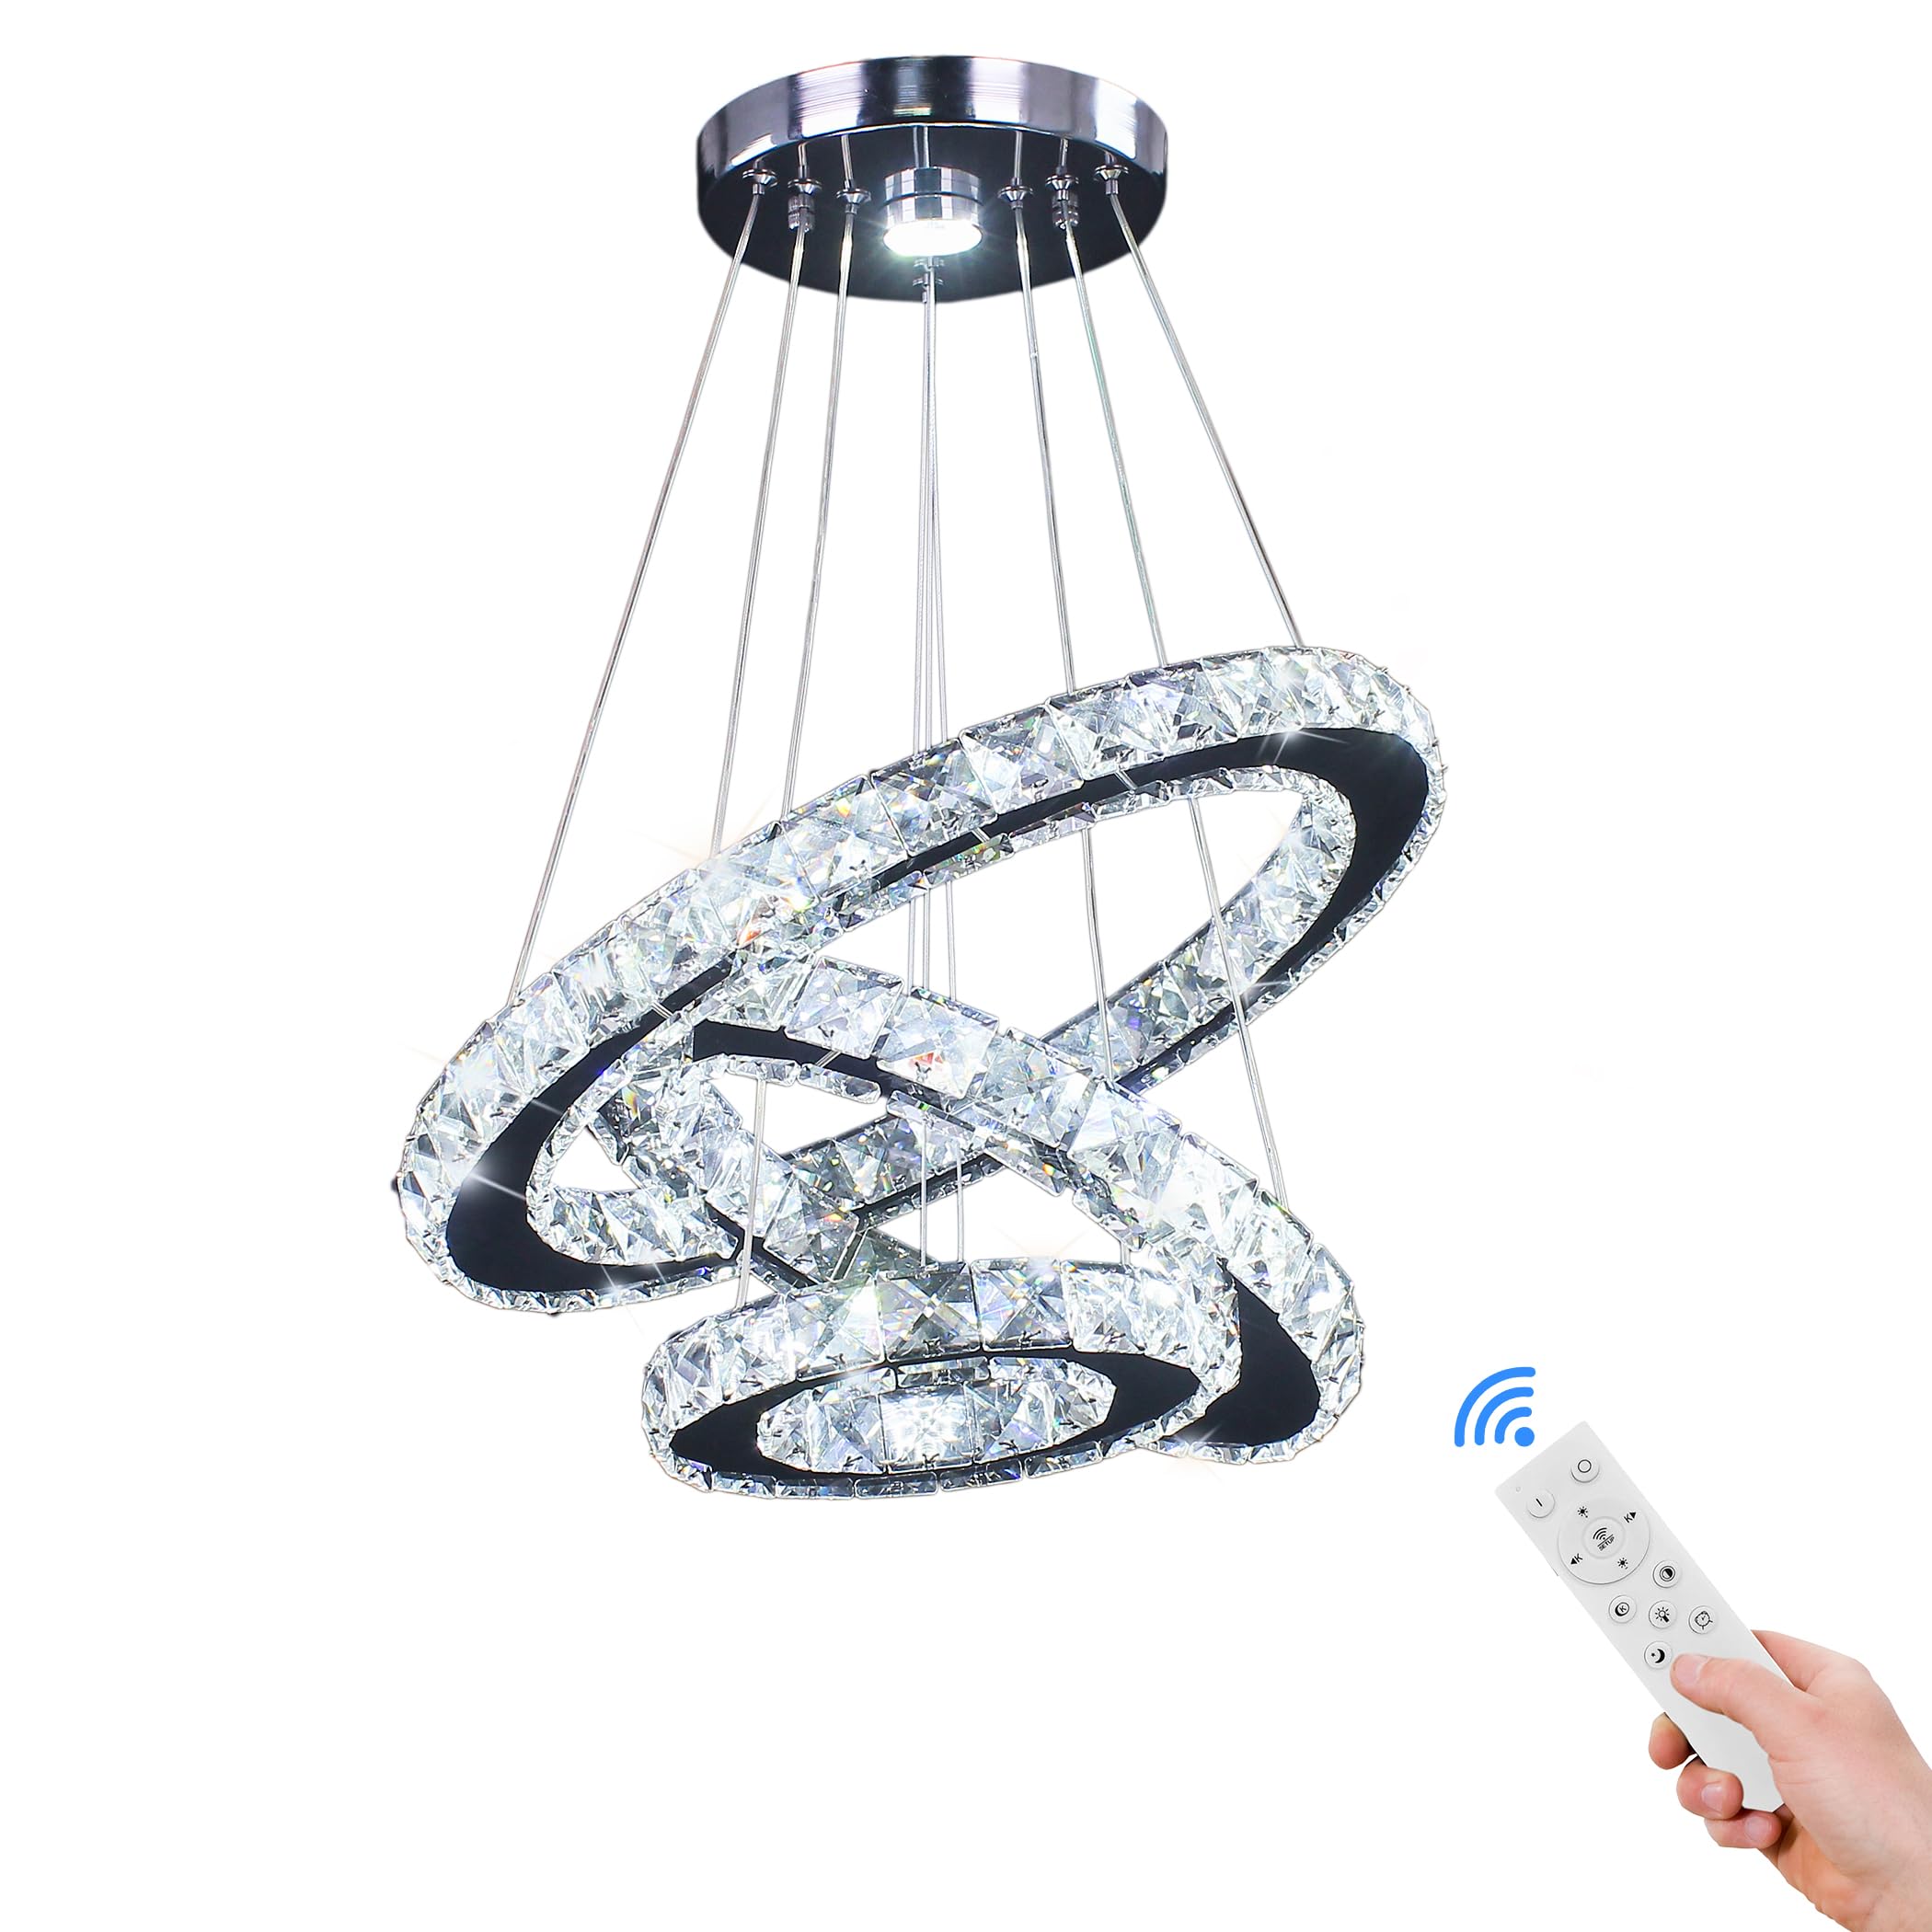 Dixun Dimmable LED Chandeliers Modern Ceiling Light Fixture 3 Rings Adjustable Stainless Steel Pendant Light Chandelier for Bedrooms Living Room